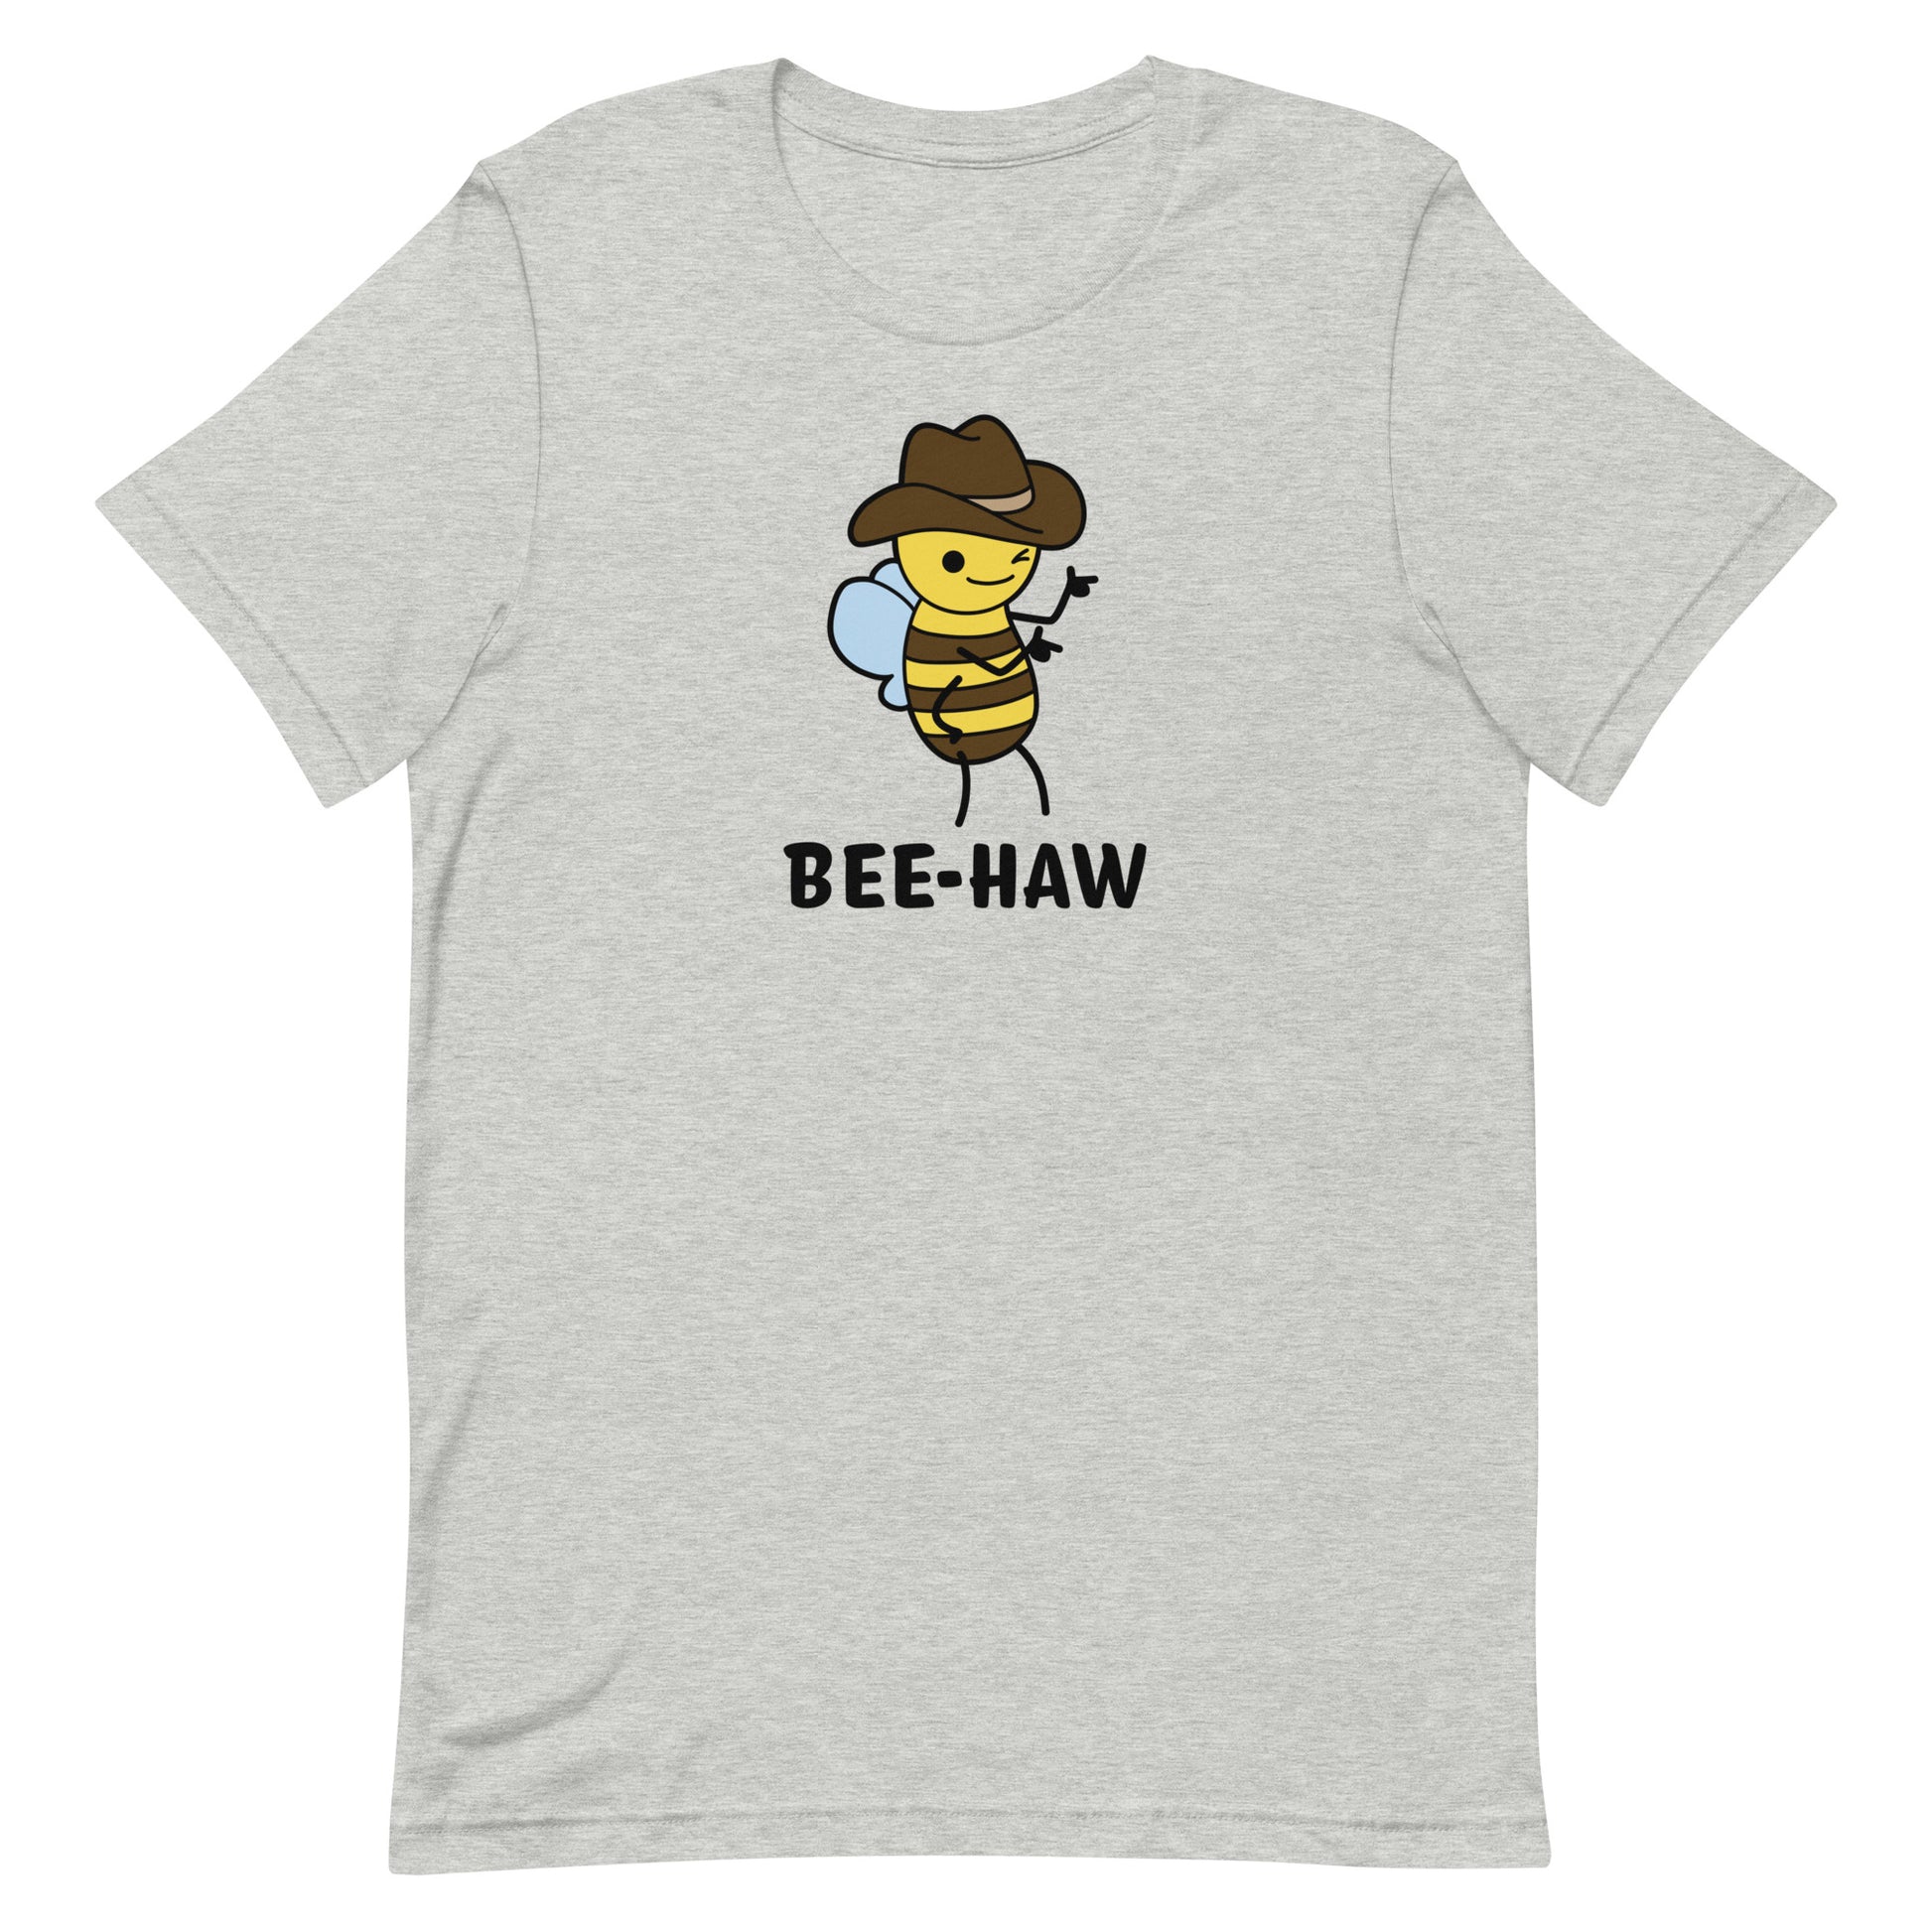 A grey crewneck t-shirt with an image of a bee in a cowboy hat. The bee is winking and holding up "finger guns". Underneath the bee is text reading "Bee-Haw"